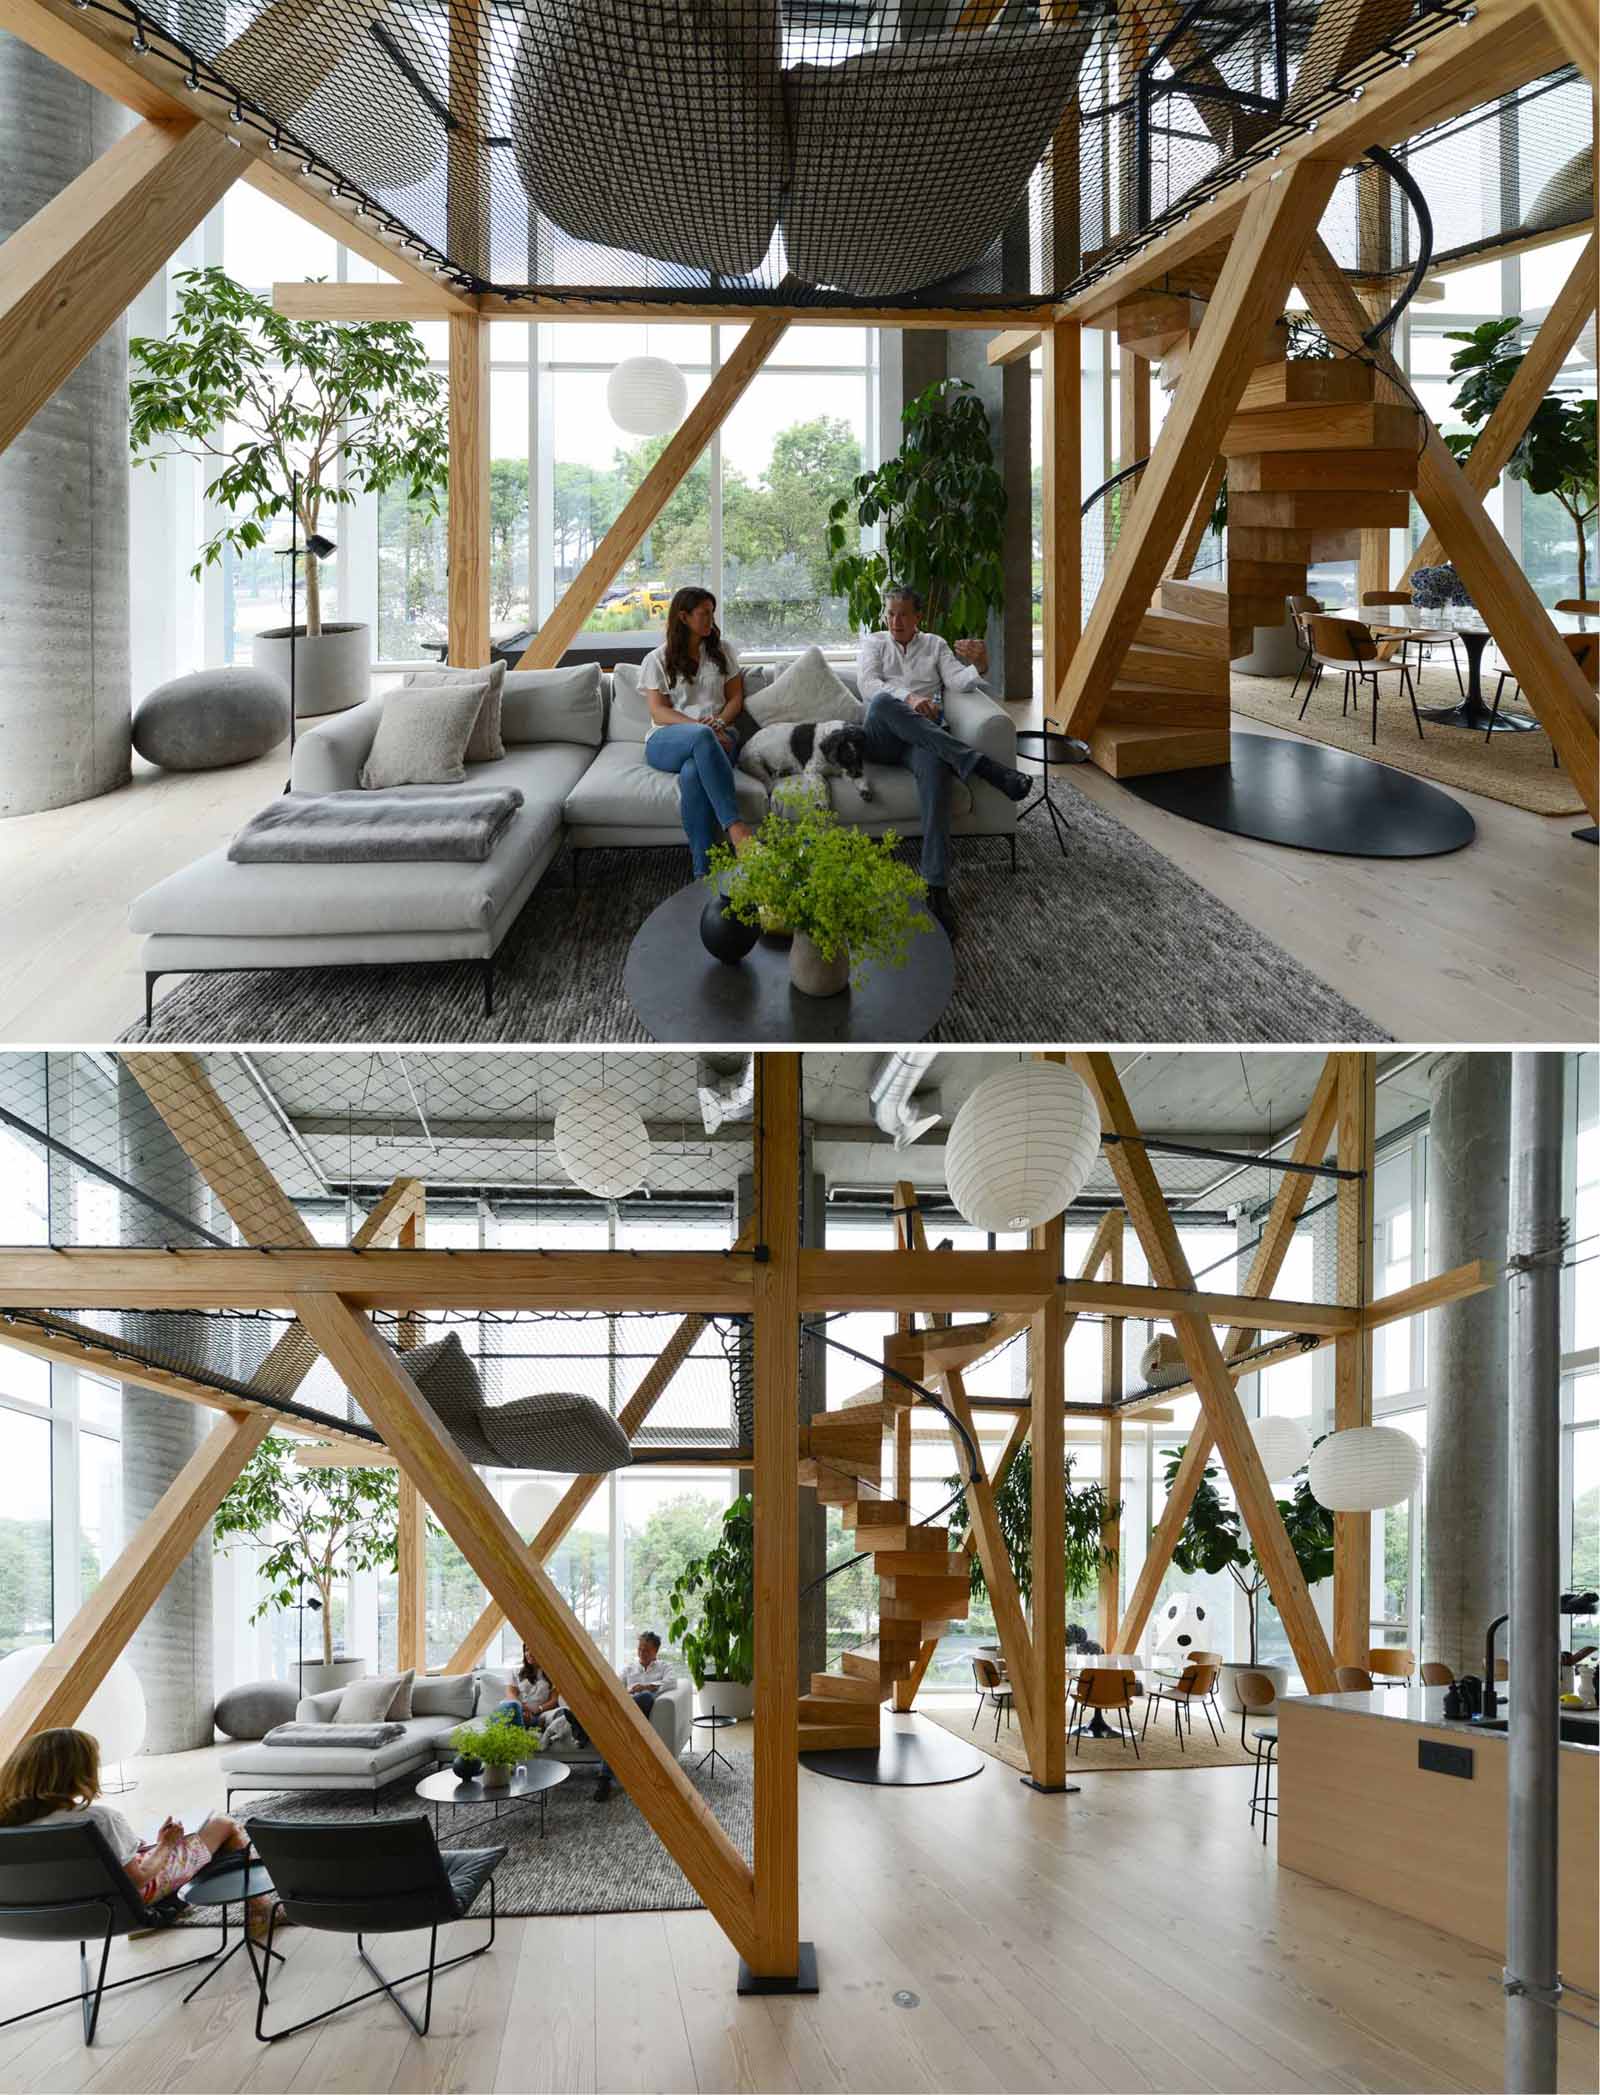 A modern apartment with 22 foot glass walls includes wood structure and netting that was inspired by a treehouse.